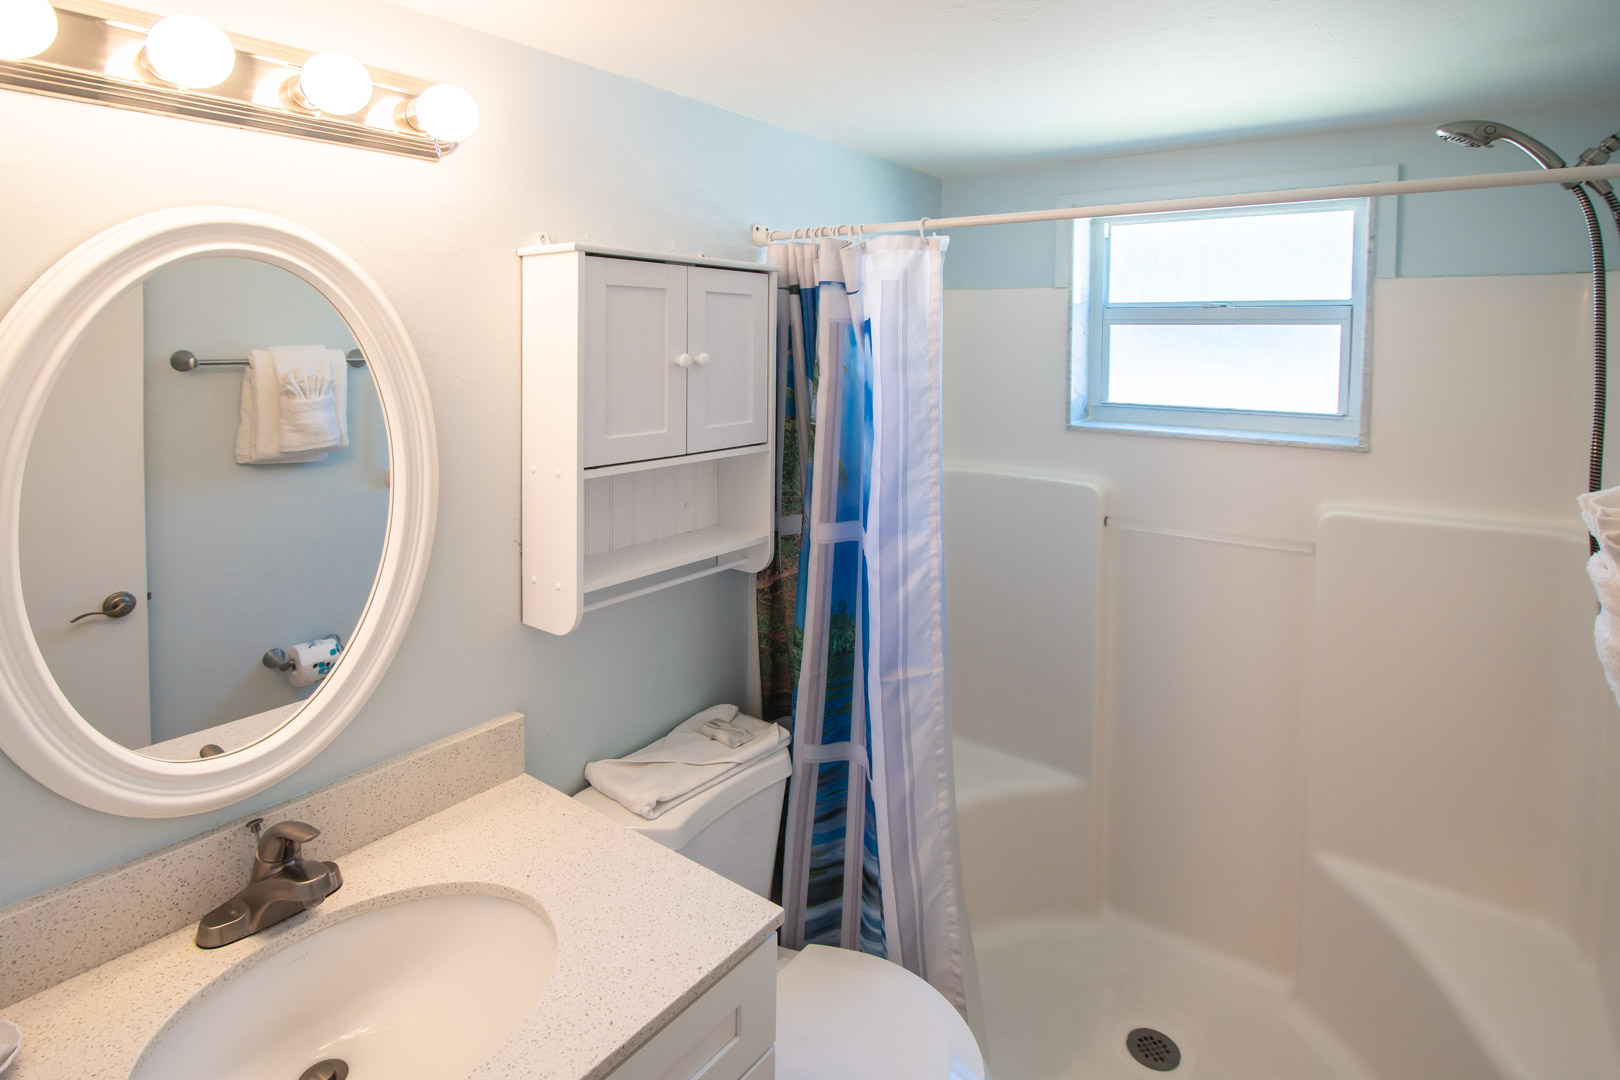 A clean bathroom at VRI's Windward Passage Resort in Fort Myers Beach, Florida.